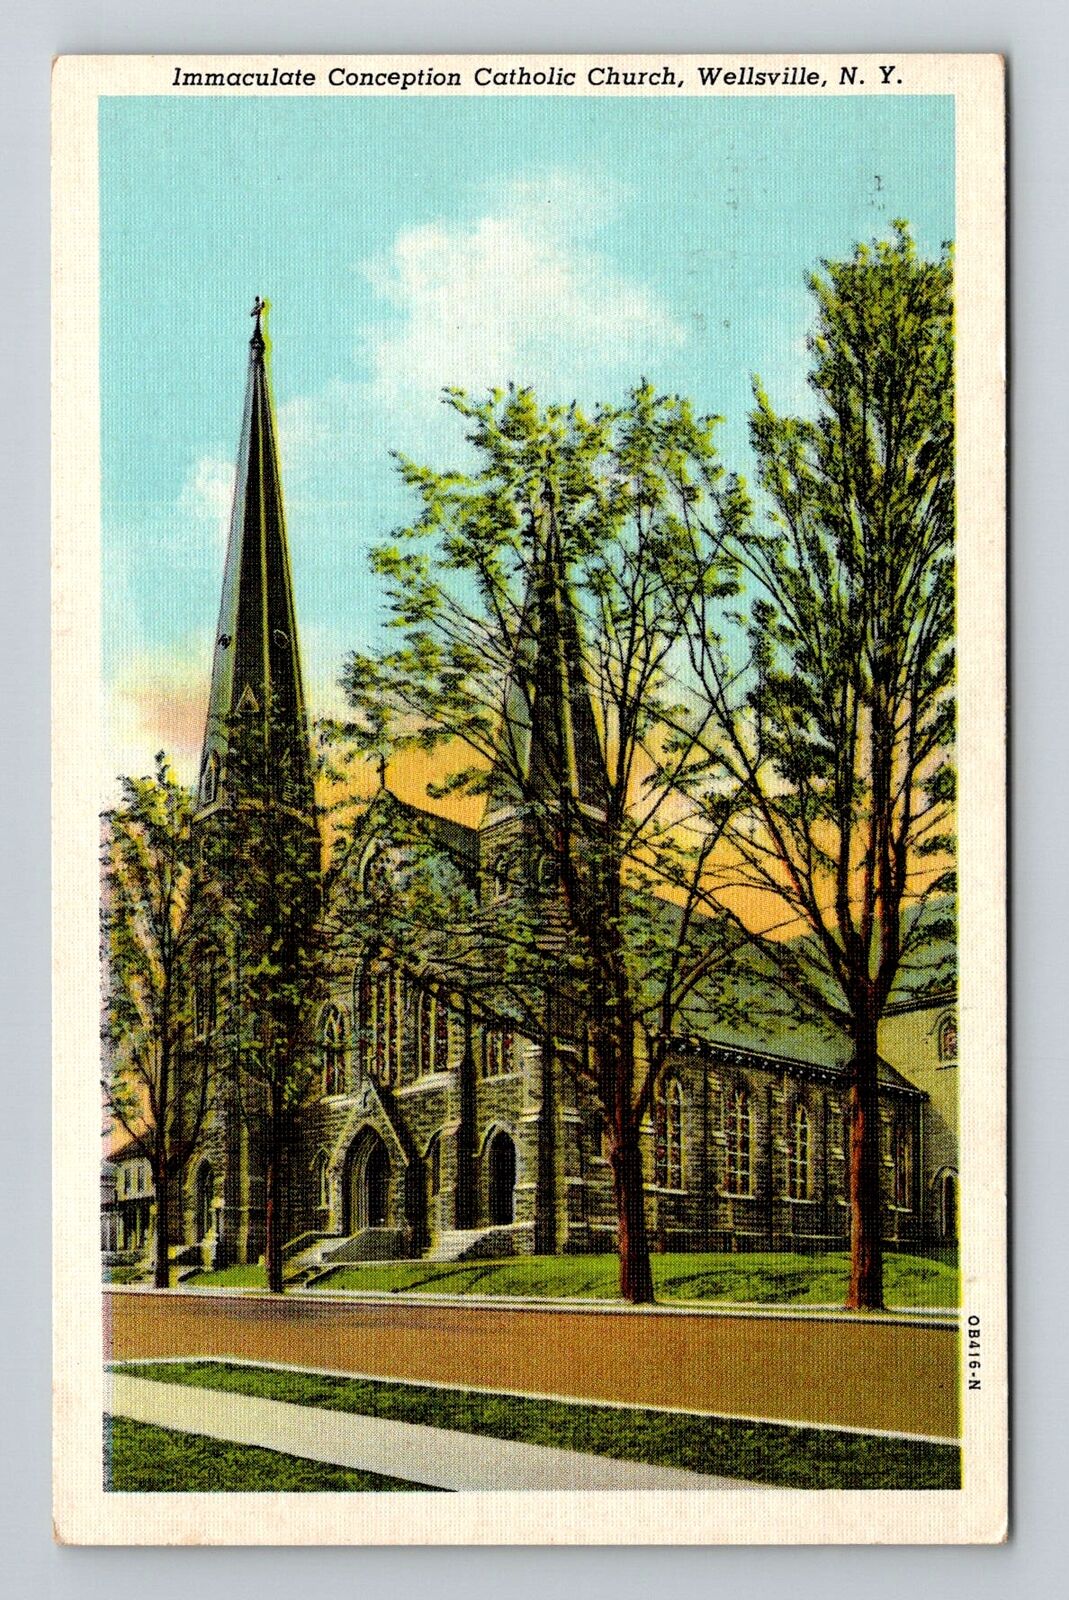 Wellsville NY-New York, Immaculate Conception Catholic Church Vintage Postcard